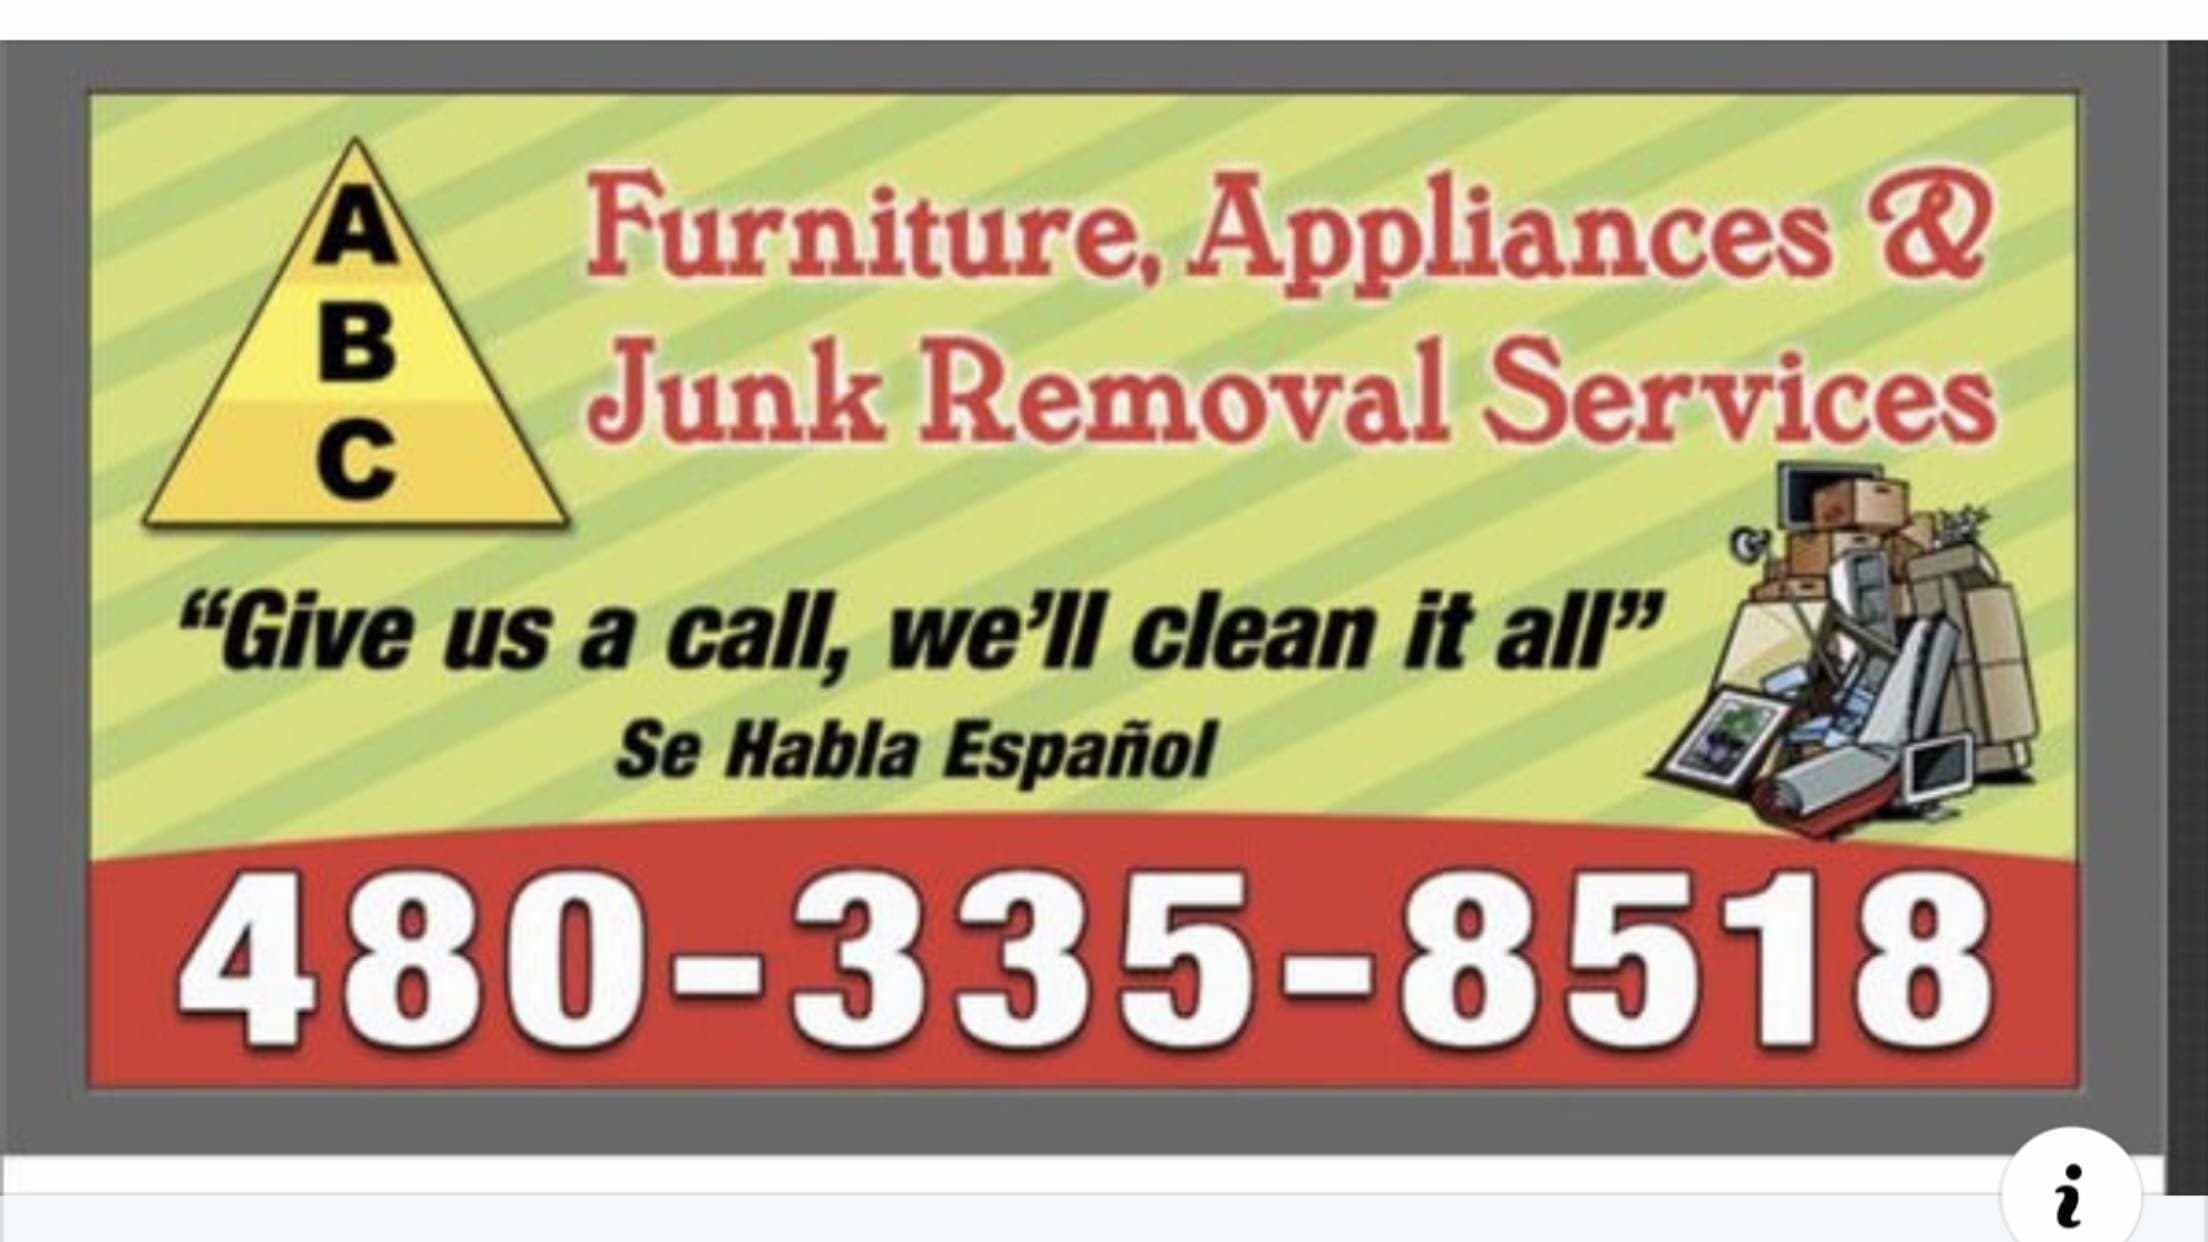 Furniture, Appliances and Junk Removal